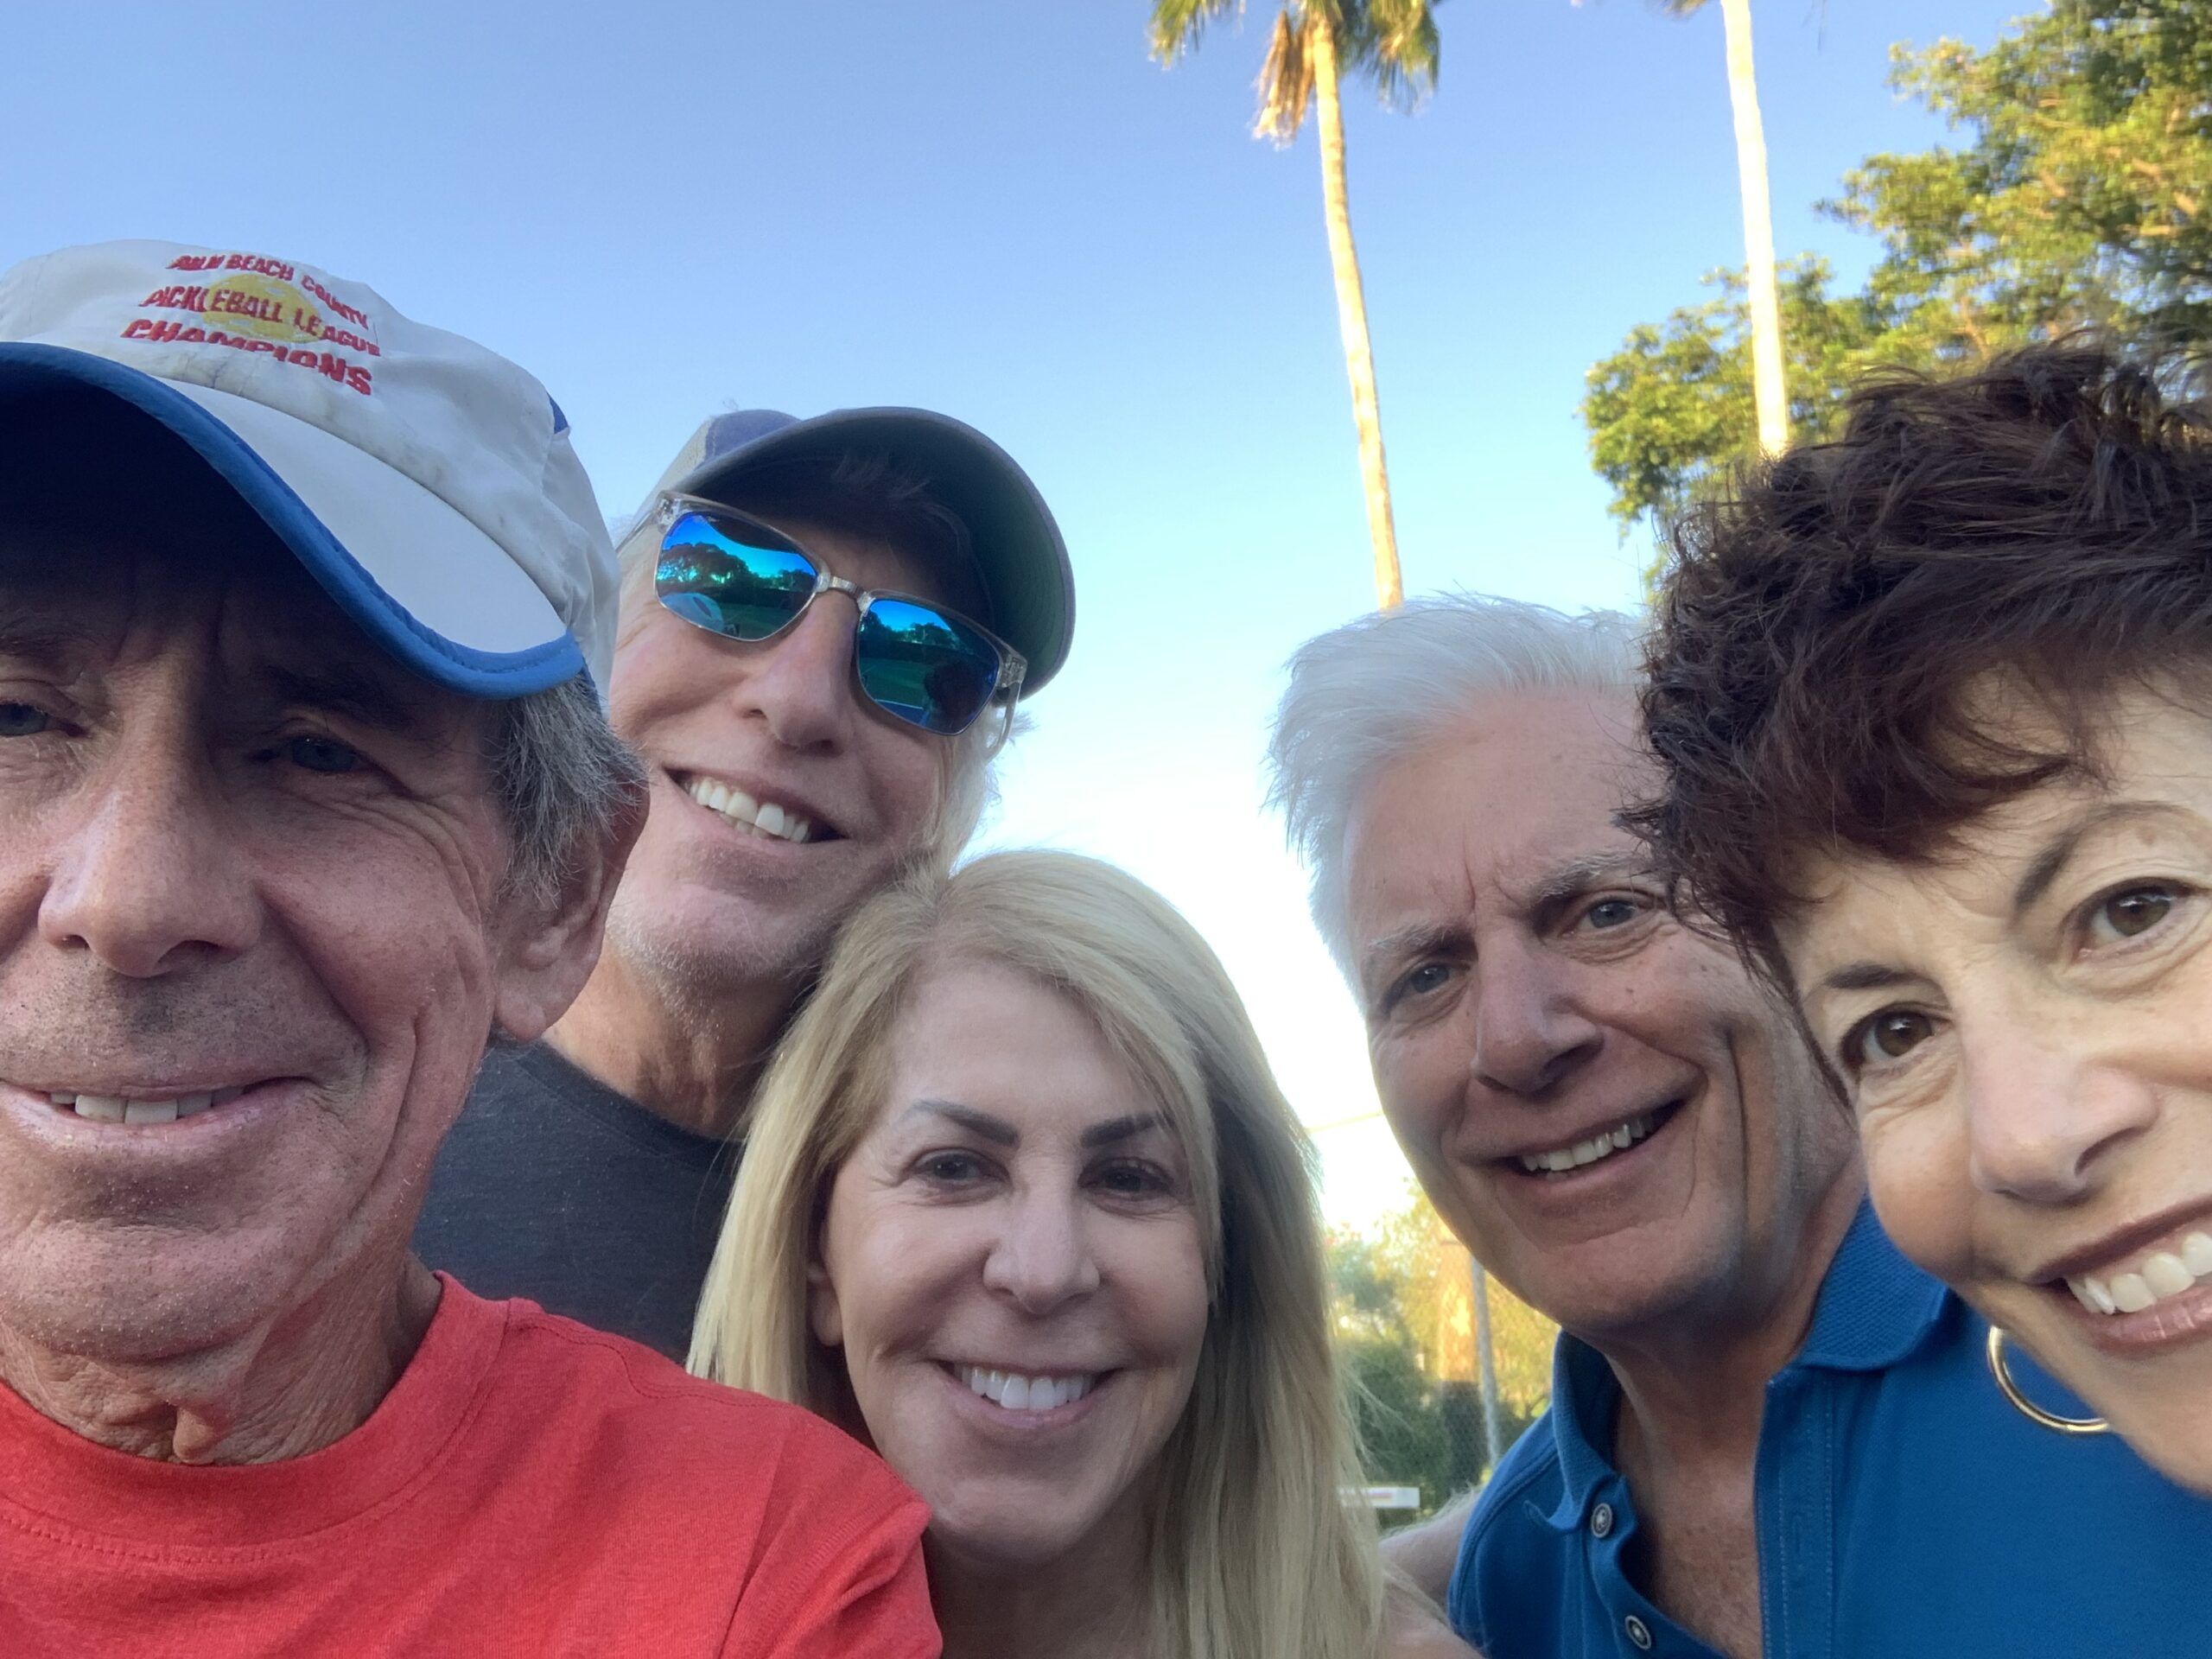 Bob with Allison, Bruce, Bob, and Denise after a spirited beginners pickleball lesson in Delray Beach, FL